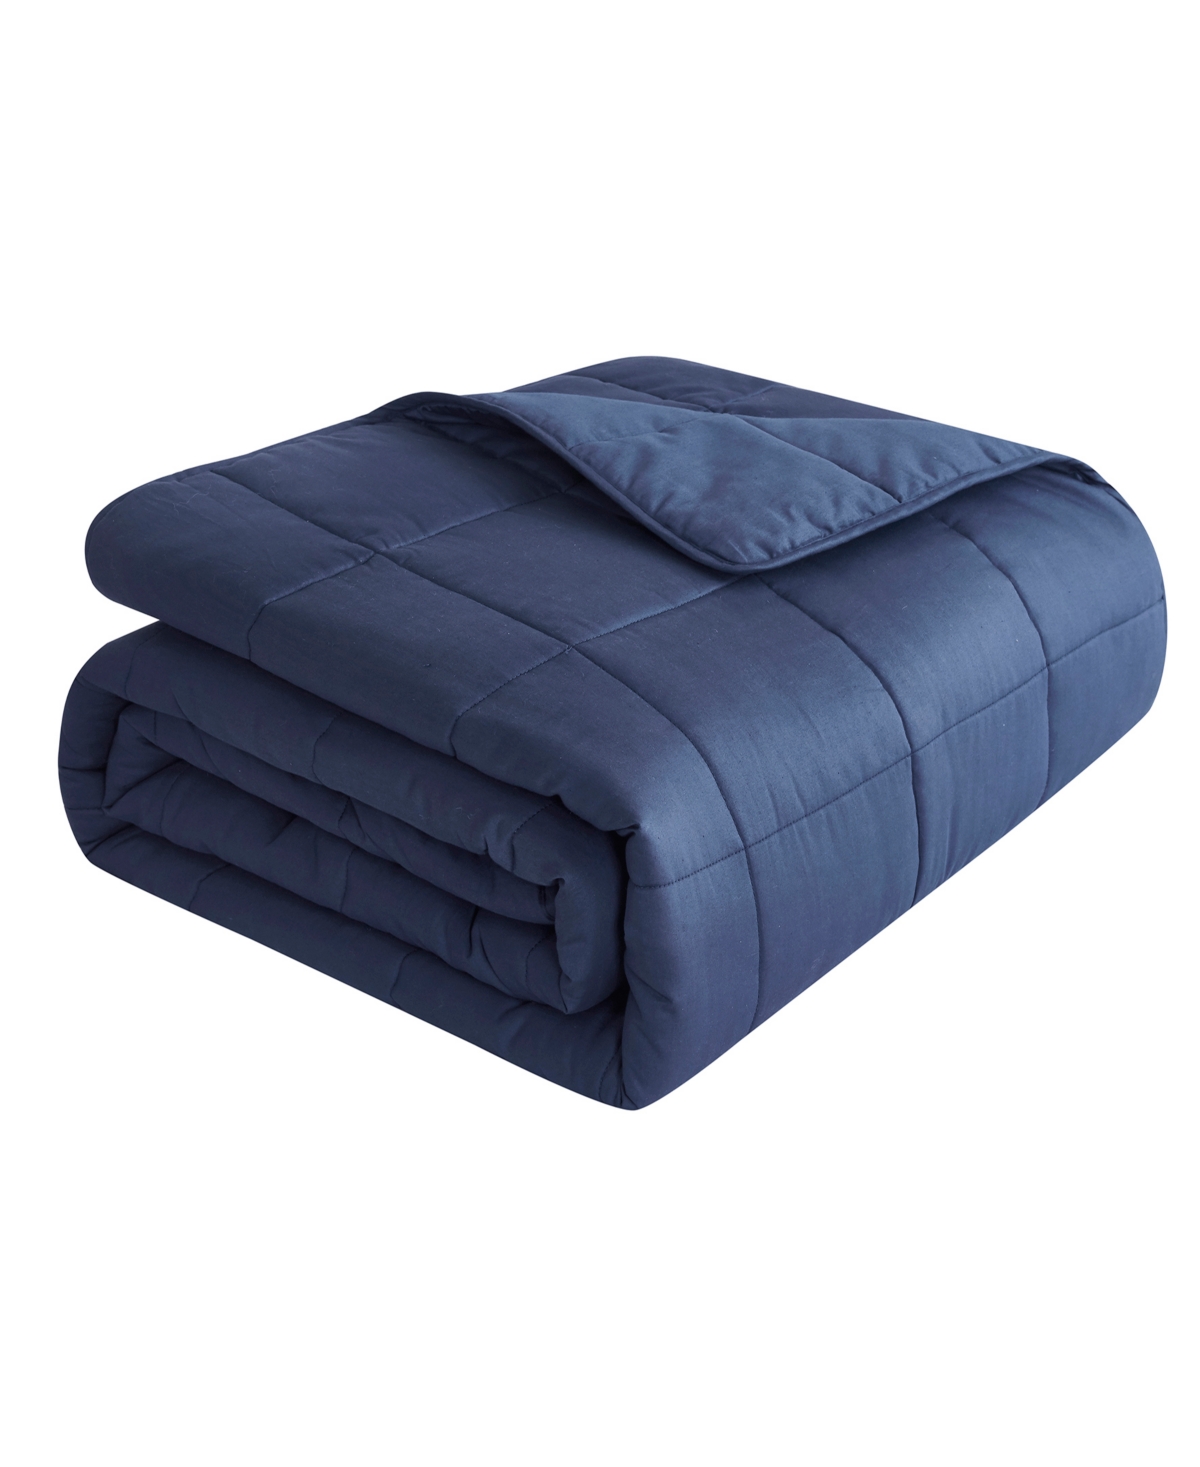 Dream Theory Cotton Weighted 15 Lbs Blanket, Twin Bedding In Navy